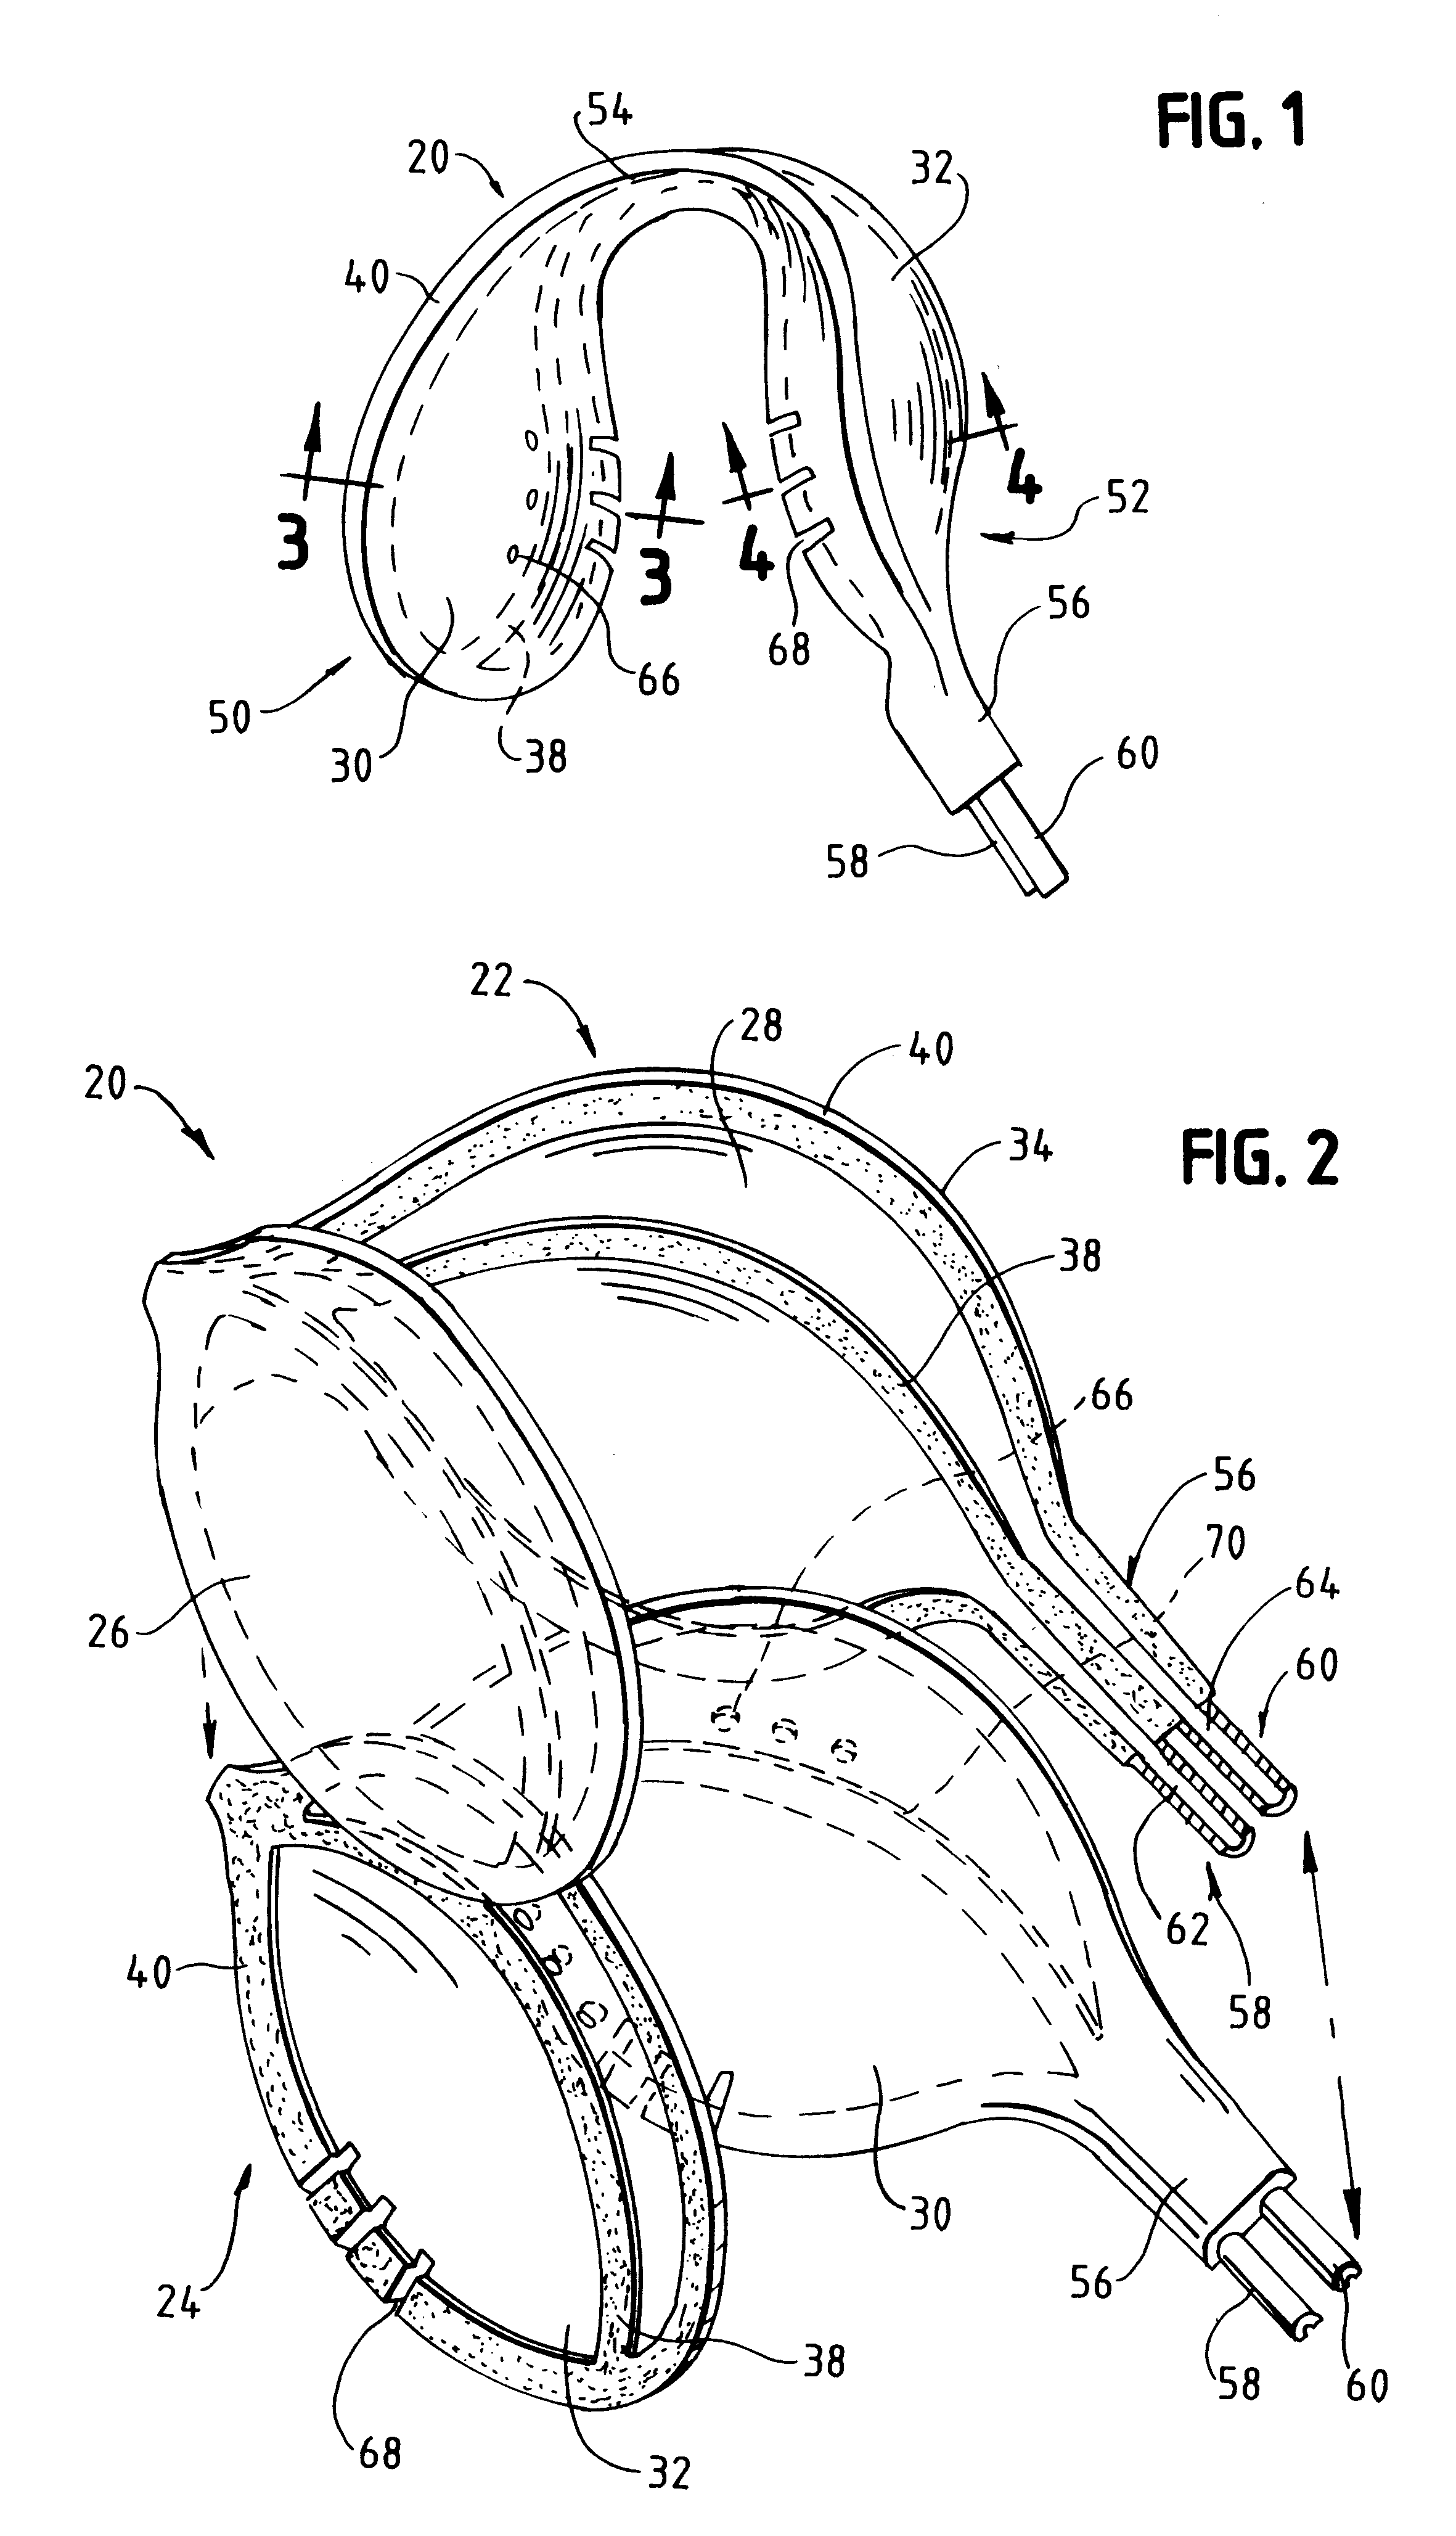 Oral isolation device with evacuation chambers